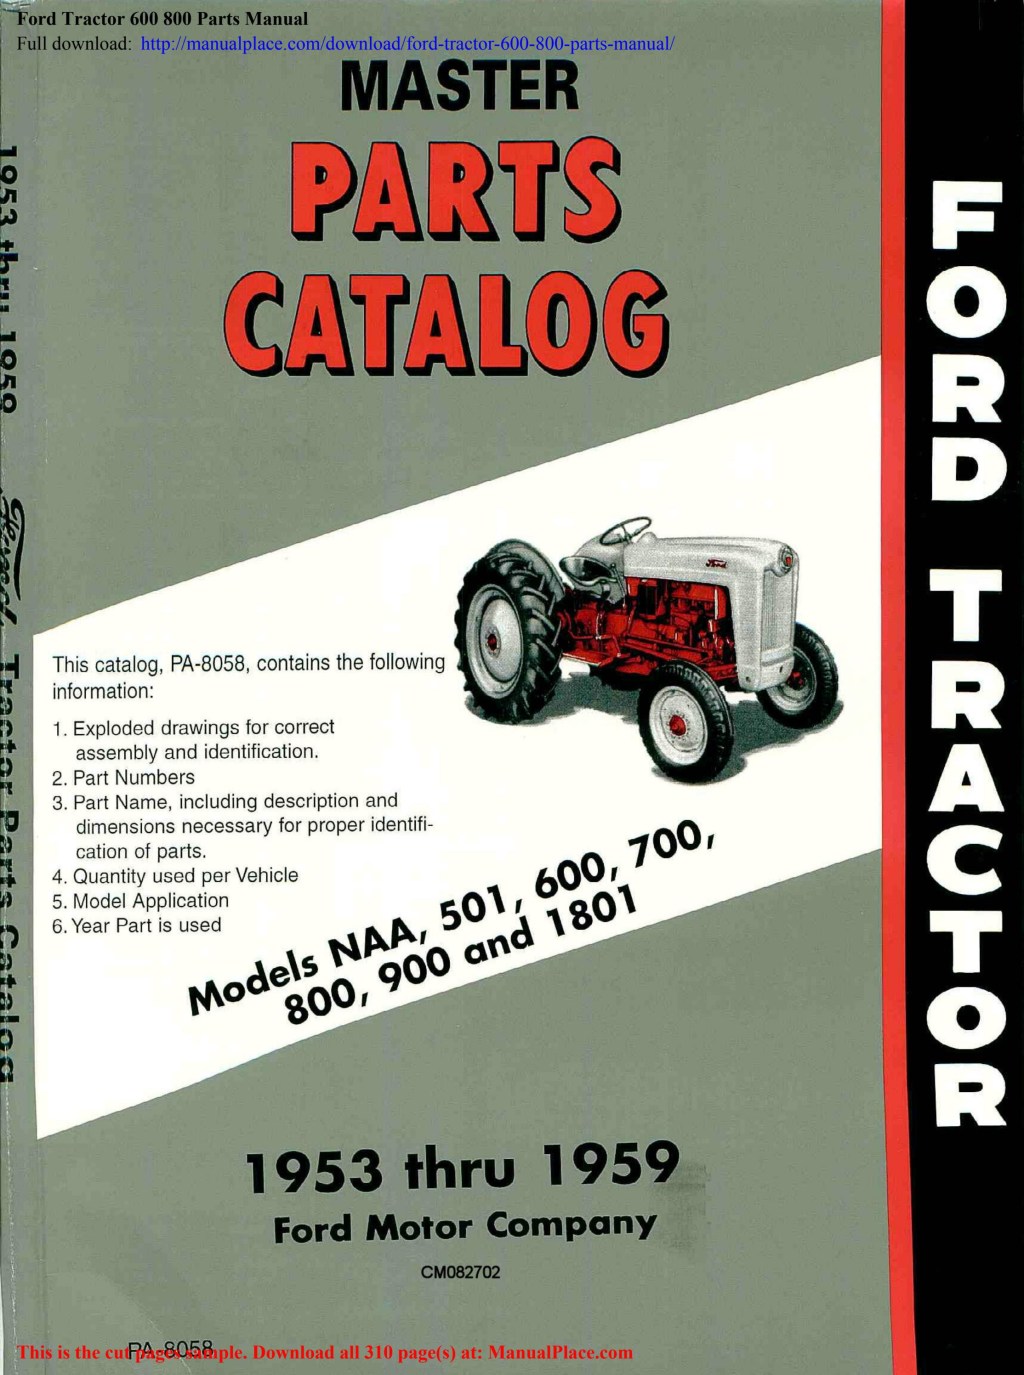 Picture of: Ford Tractor   Parts Manual by VirginiaAguirrem – Issuu